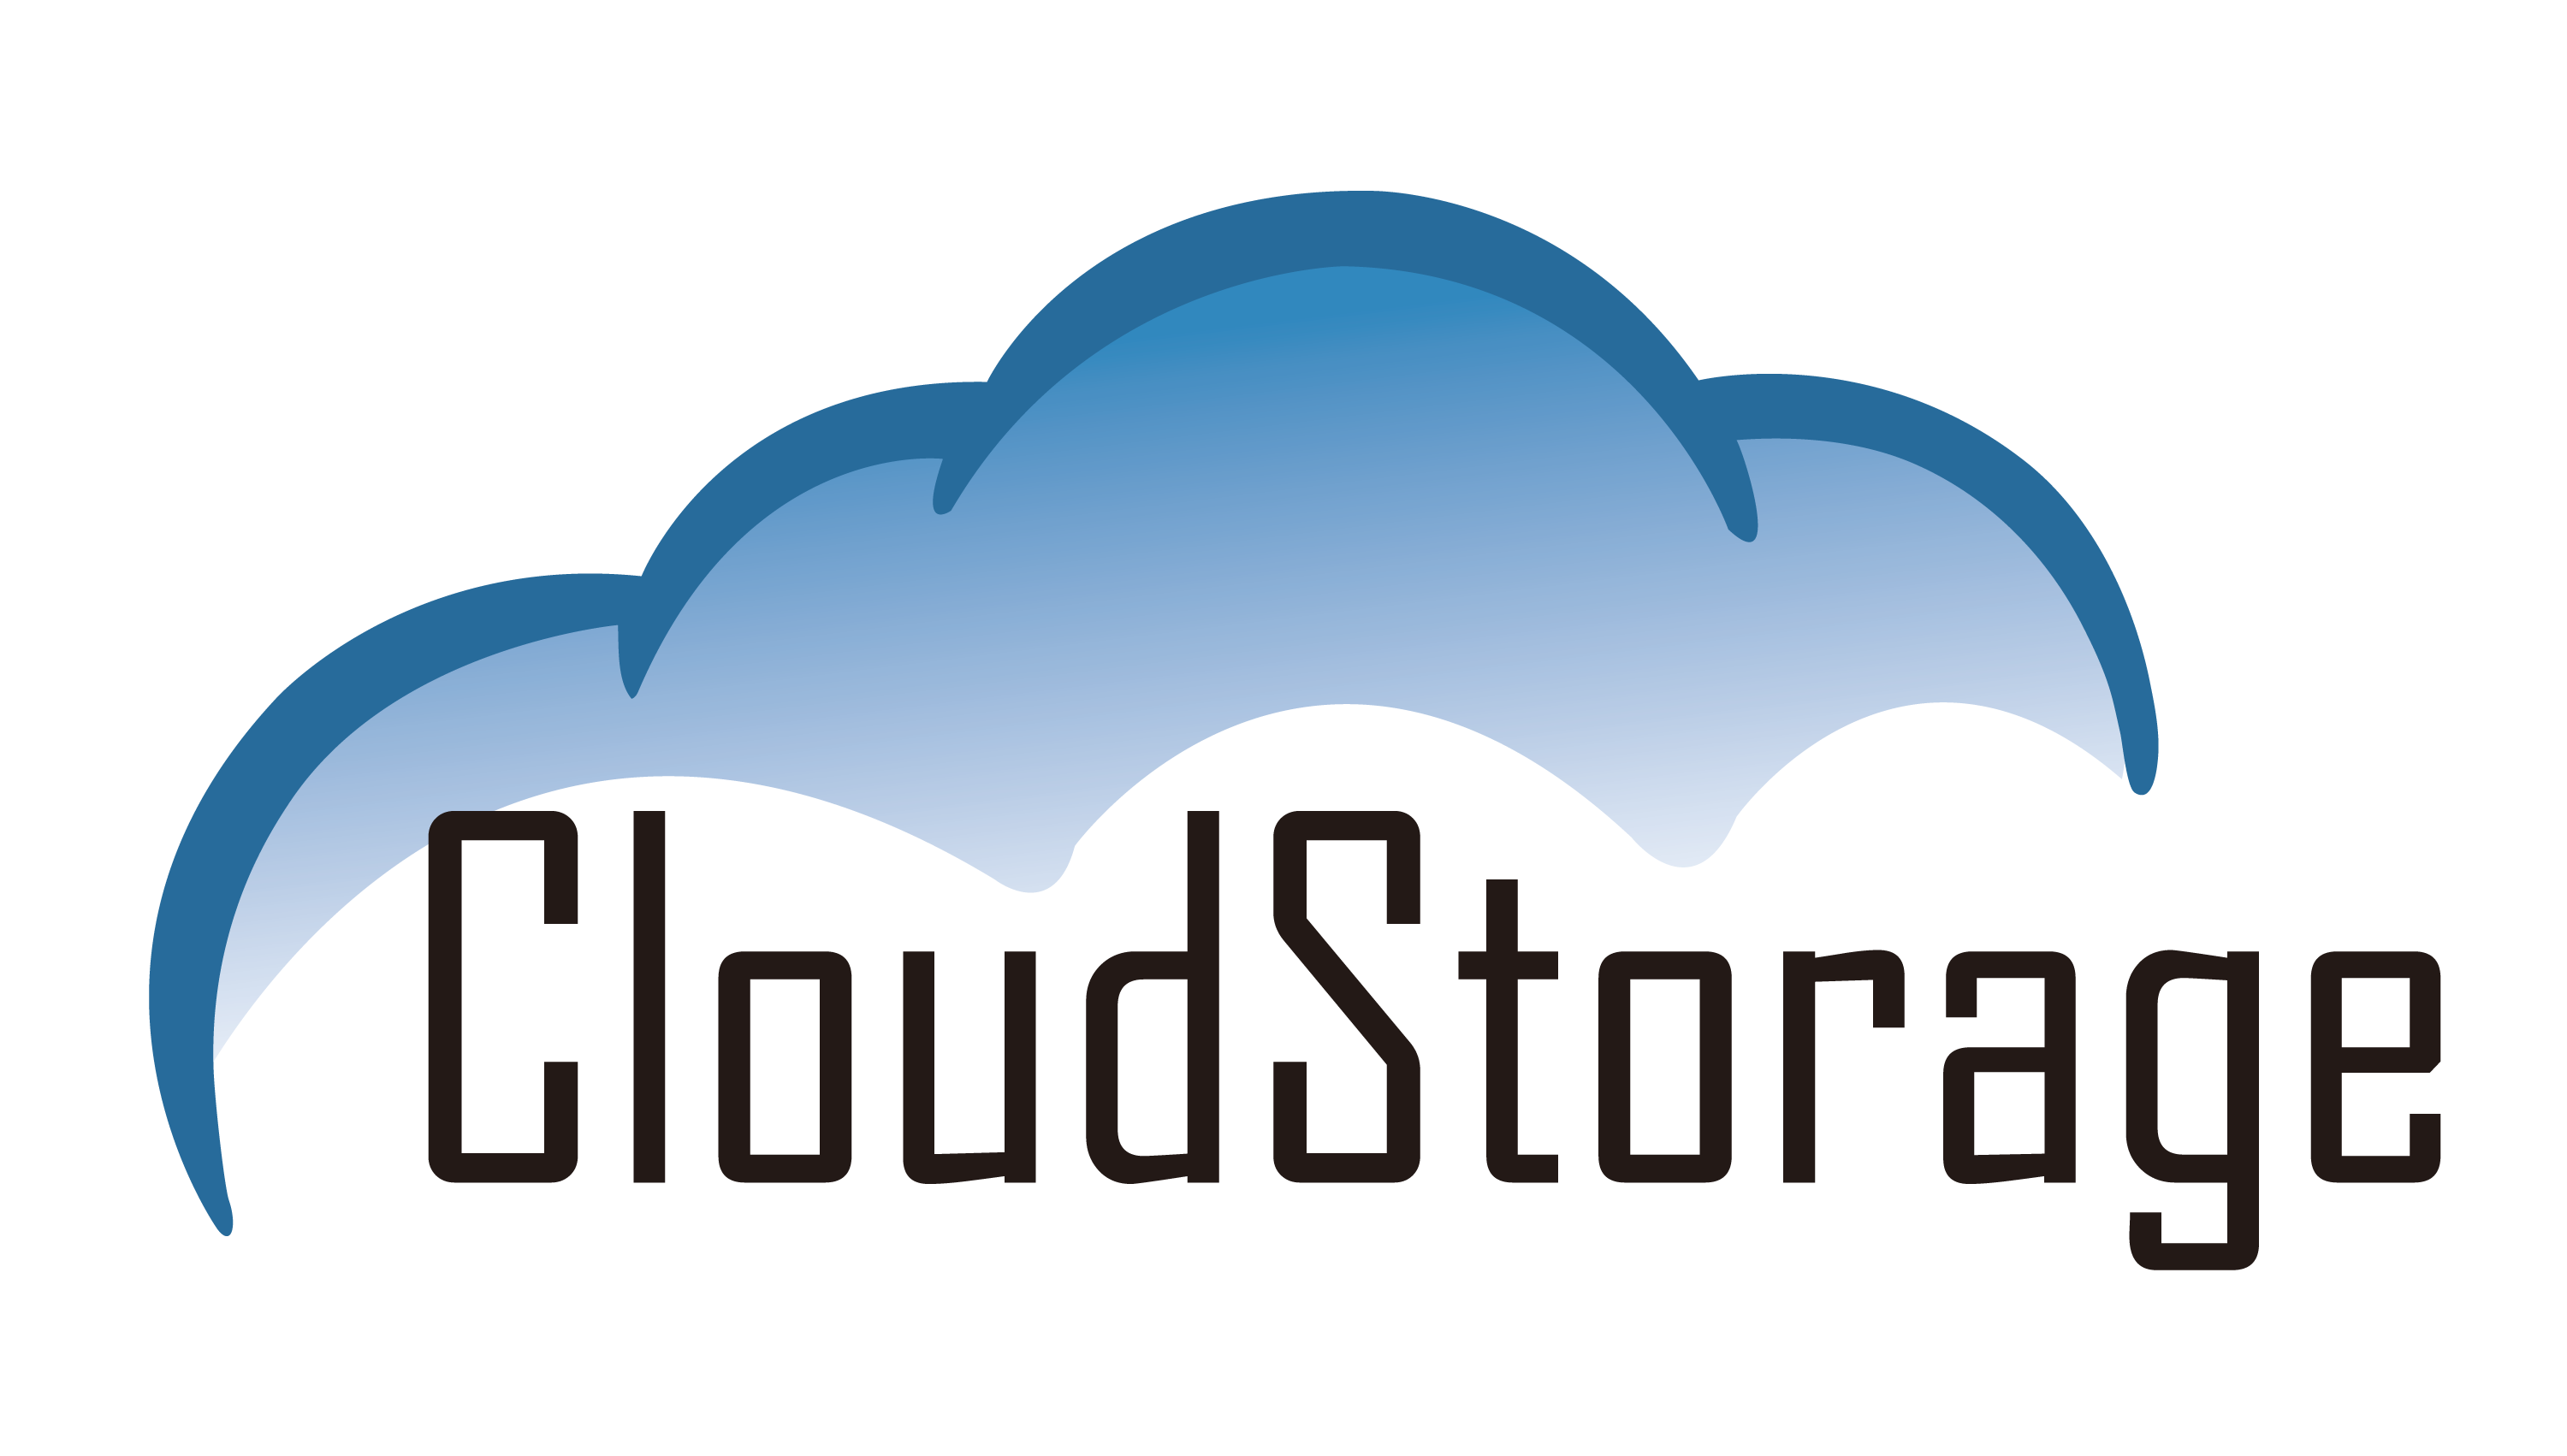 Podcast: Cloud Storage Corp joins ASCDI, offers large inventory of storage products